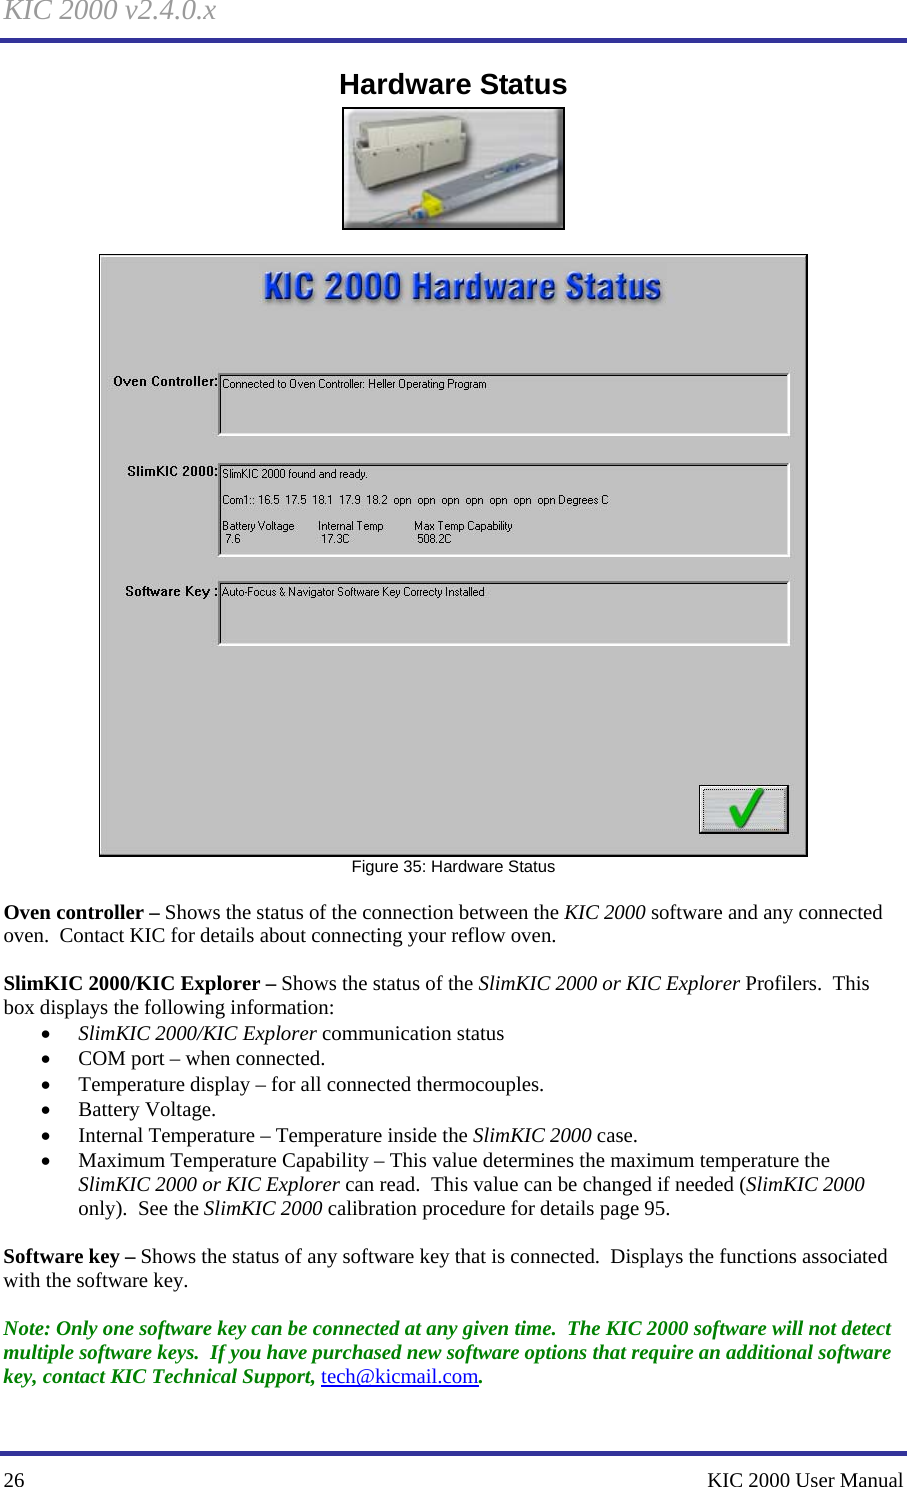 KIC 2000 v2.4.0.x 26    KIC 2000 User Manual Hardware Status    Figure 35: Hardware Status  Oven controller – Shows the status of the connection between the KIC 2000 software and any connected oven.  Contact KIC for details about connecting your reflow oven.  SlimKIC 2000/KIC Explorer – Shows the status of the SlimKIC 2000 or KIC Explorer Profilers.  This box displays the following information: • SlimKIC 2000/KIC Explorer communication status • COM port – when connected. • Temperature display – for all connected thermocouples. • Battery Voltage. • Internal Temperature – Temperature inside the SlimKIC 2000 case. • Maximum Temperature Capability – This value determines the maximum temperature the SlimKIC 2000 or KIC Explorer can read.  This value can be changed if needed (SlimKIC 2000 only).  See the SlimKIC 2000 calibration procedure for details page 95.  Software key – Shows the status of any software key that is connected.  Displays the functions associated with the software key.  Note: Only one software key can be connected at any given time.  The KIC 2000 software will not detect multiple software keys.  If you have purchased new software options that require an additional software key, contact KIC Technical Support, tech@kicmail.com.  